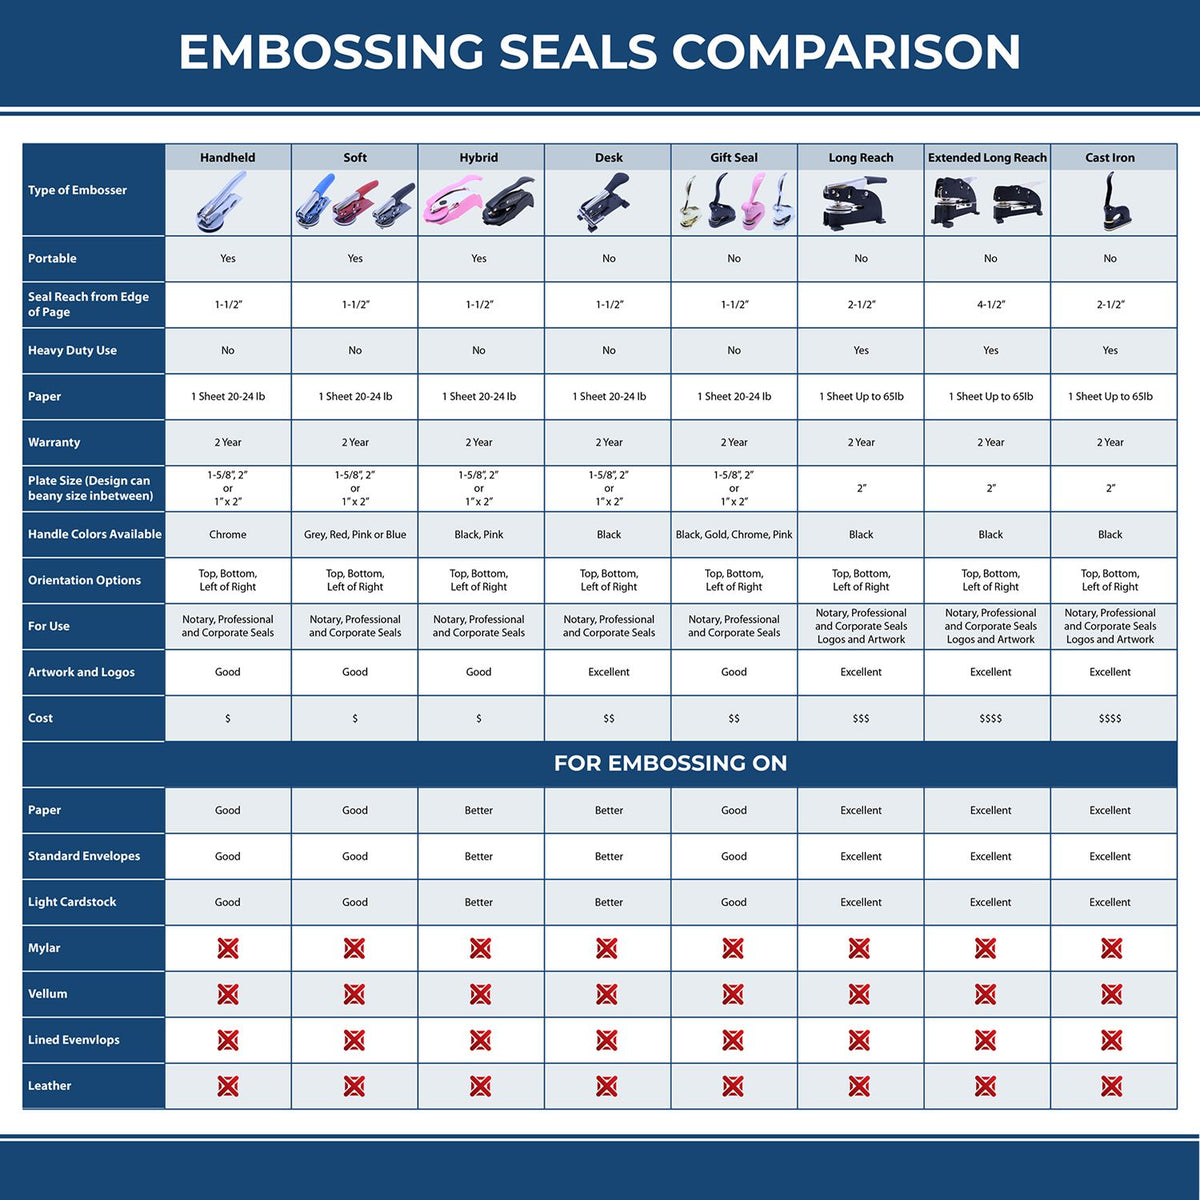 A comparison chart for the different types of mount models available for the Hybrid Ohio Geologist Seal